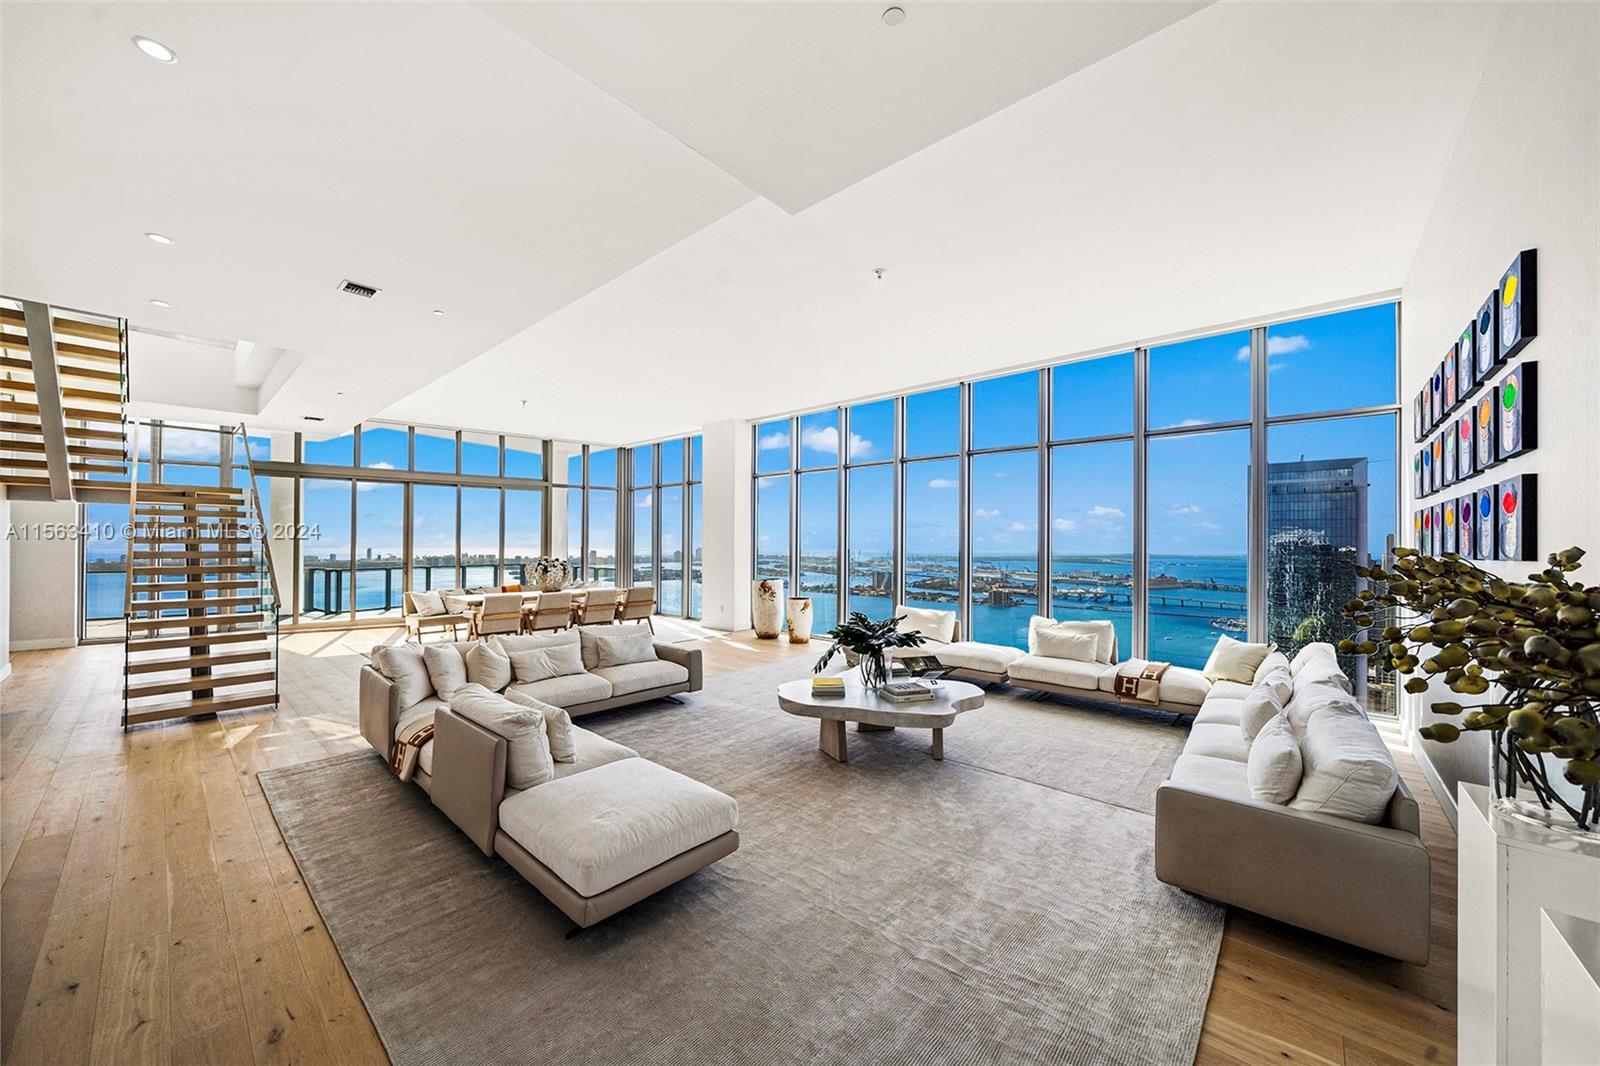 This 11,884sf Penthouse possesses qualities that set it apart from any penthouse in Miami. Boasting 